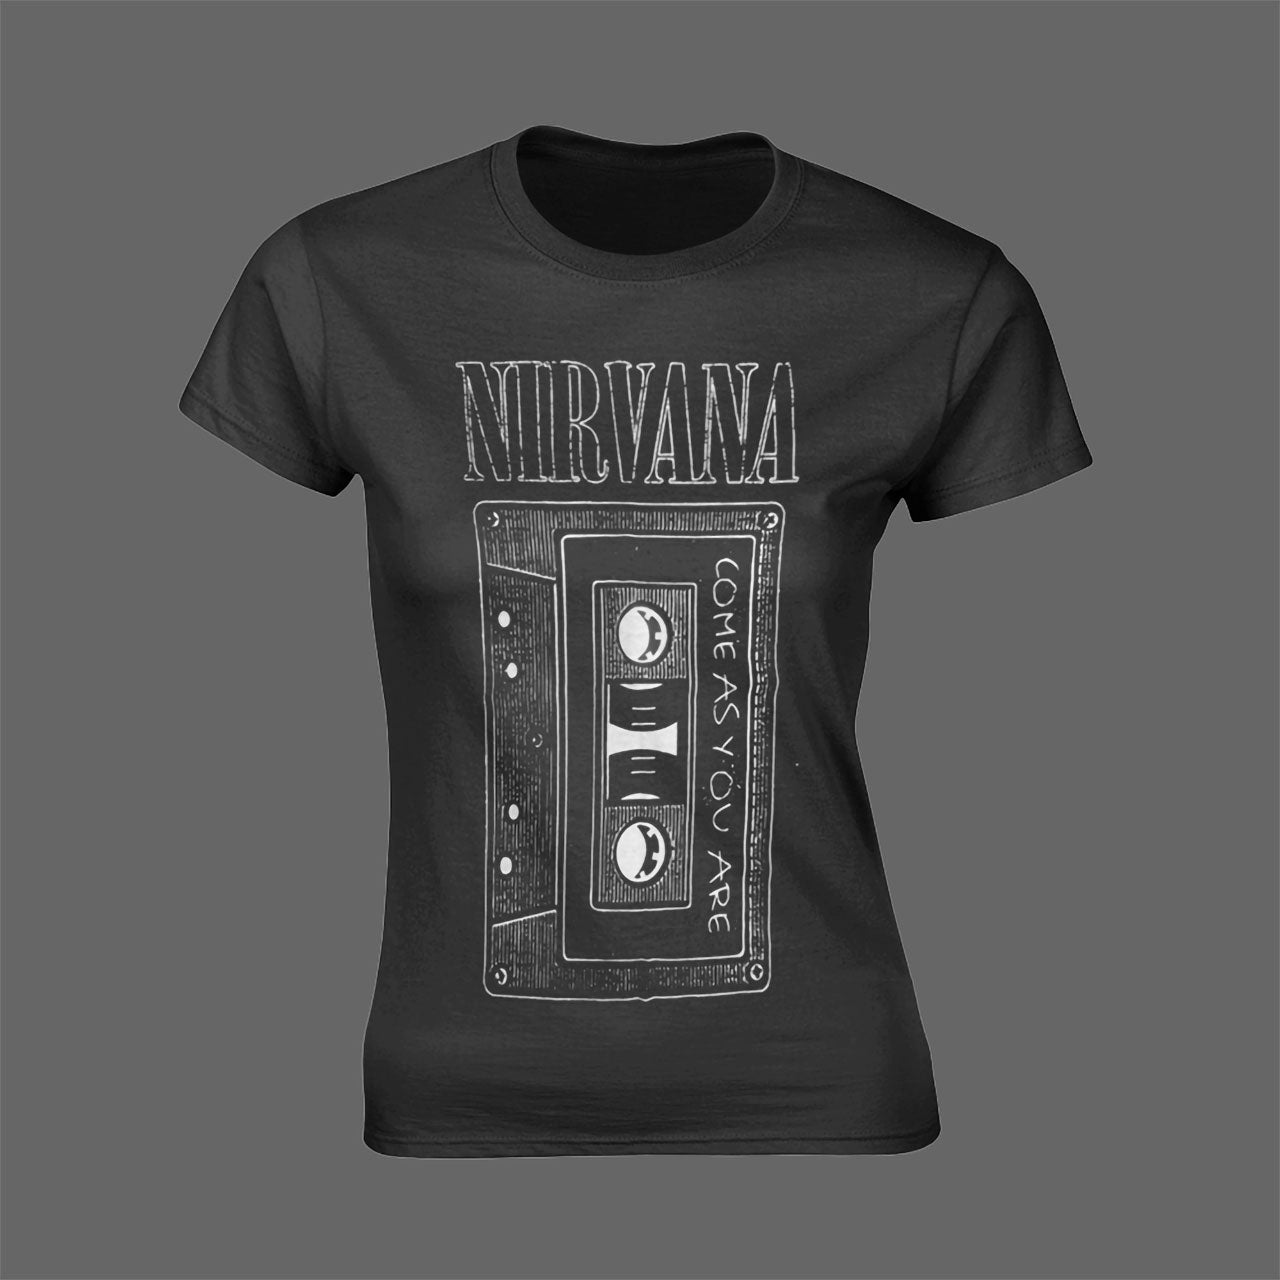 Nirvana - Come as You Are (Tape) (Women's T-Shirt)